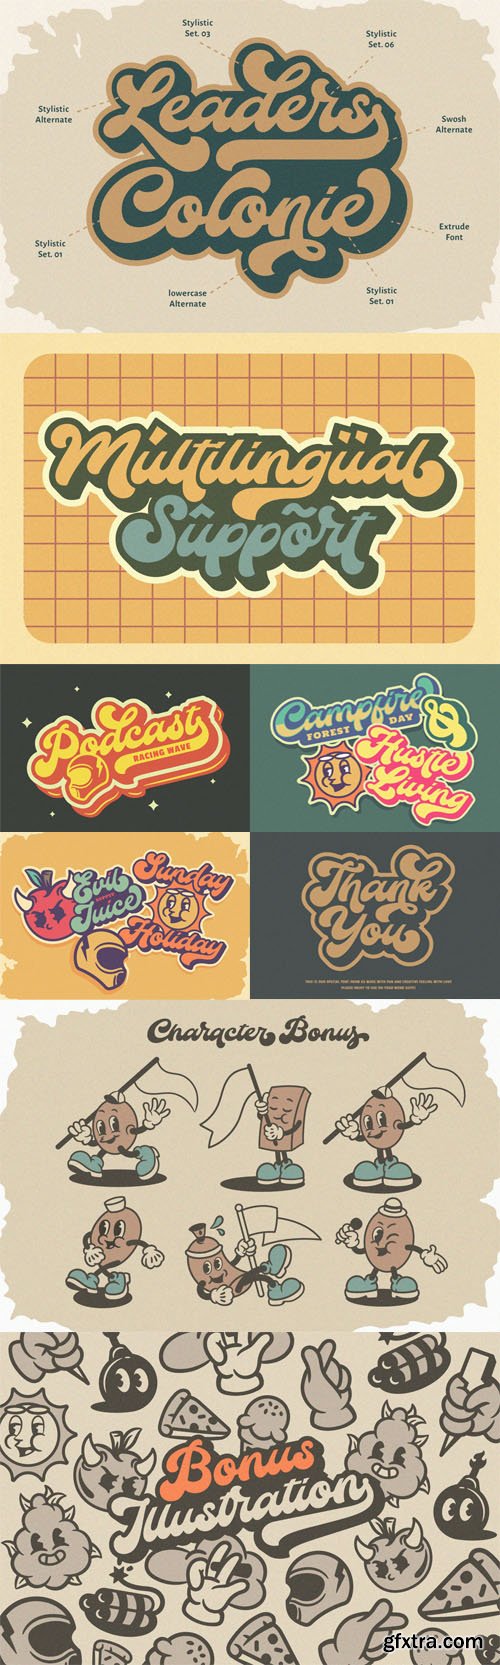 The Auratype - Retro and Classic Typeface + Extras Illustration